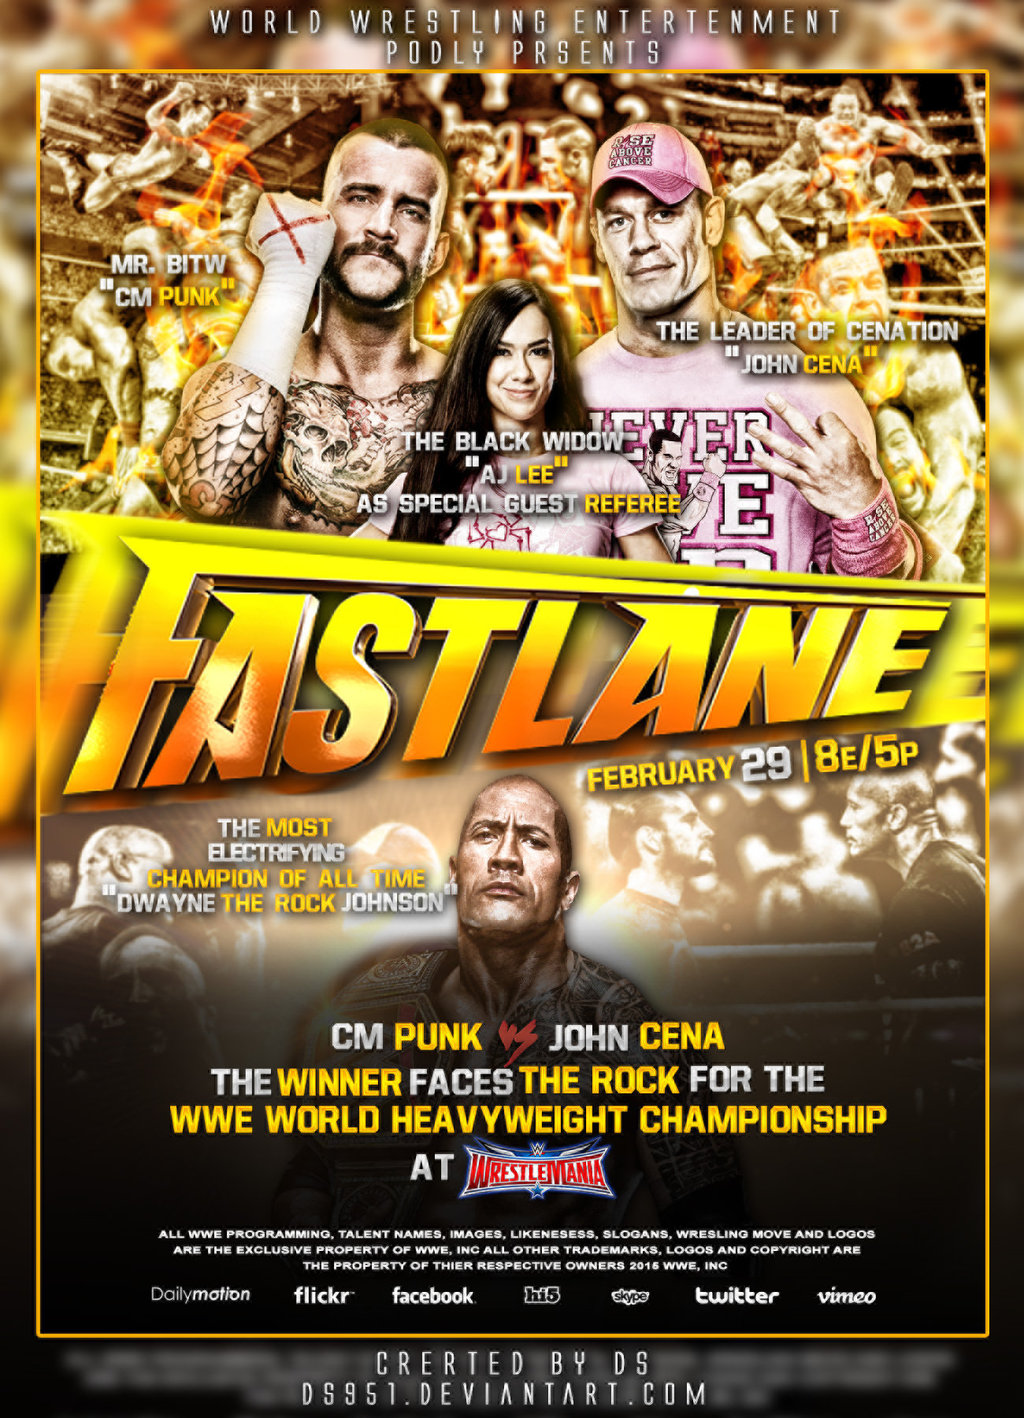 Wwe Fastlane Poster By Ds951